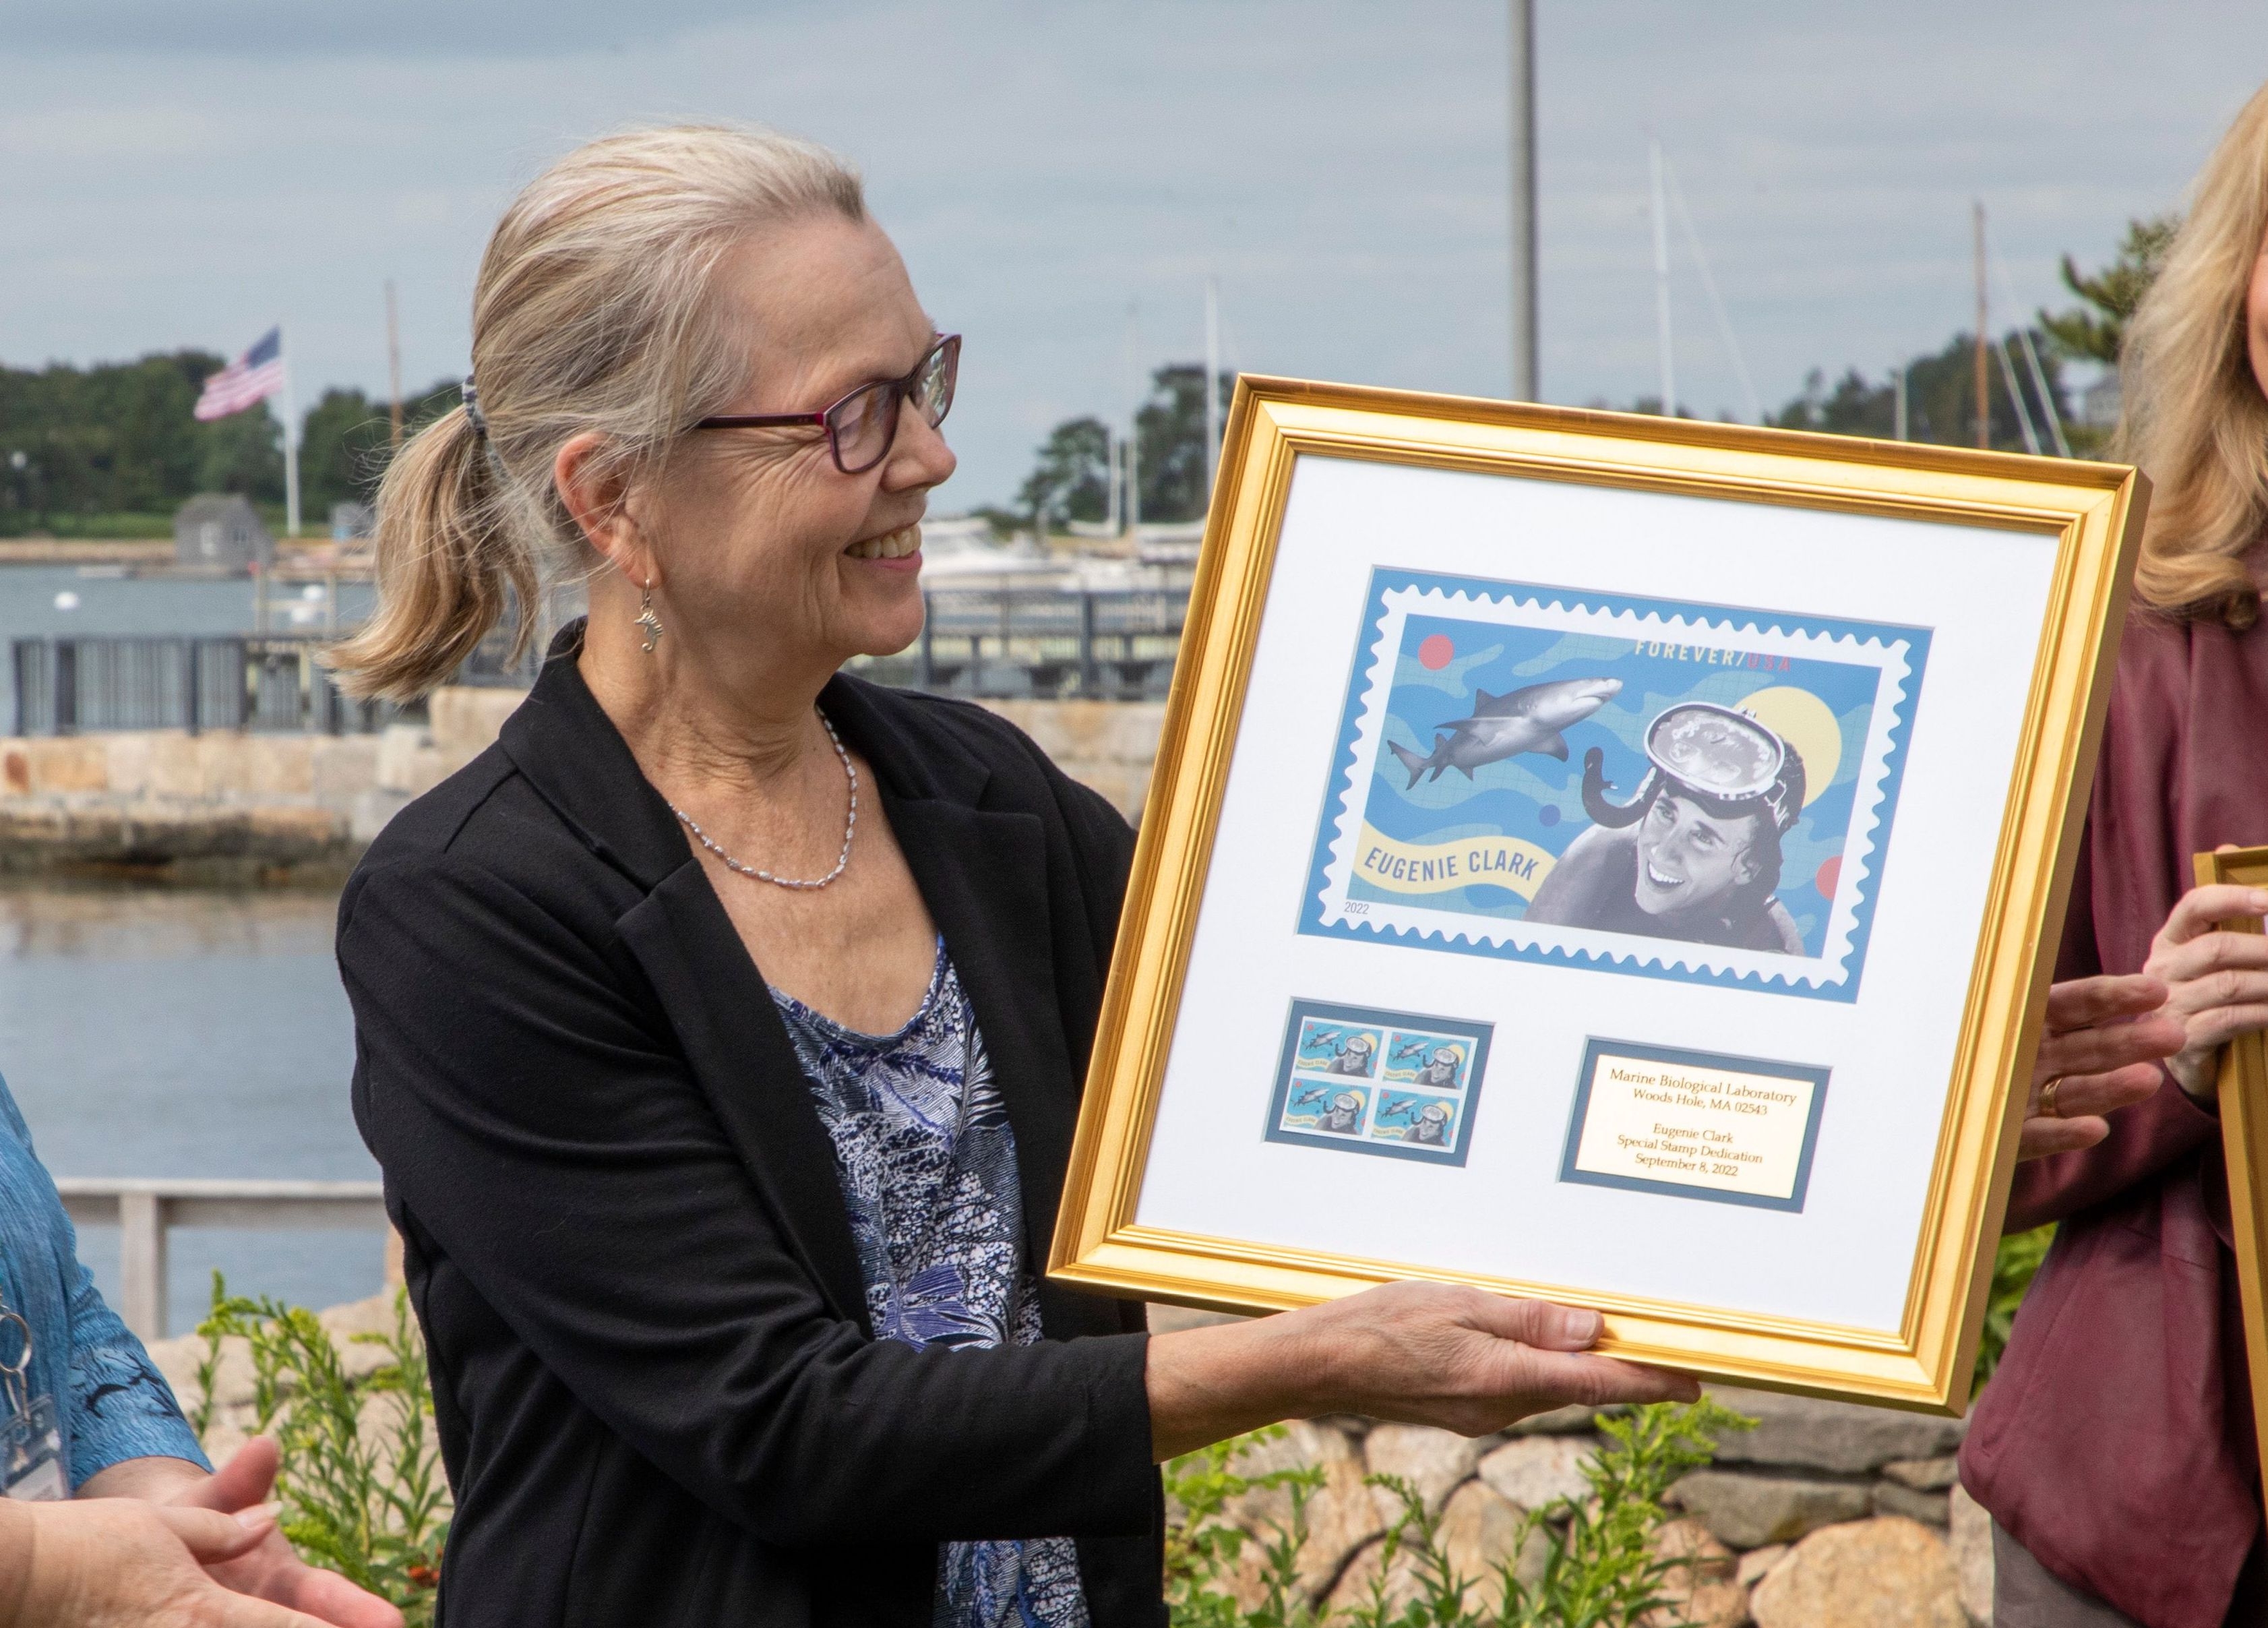 Anne Sylvester, MBL Director of Research, holds a framed print of the Eugenie Clark forever stamp, presented to her by the USPS. Credit: © Woods Hole Oceanographic Institution